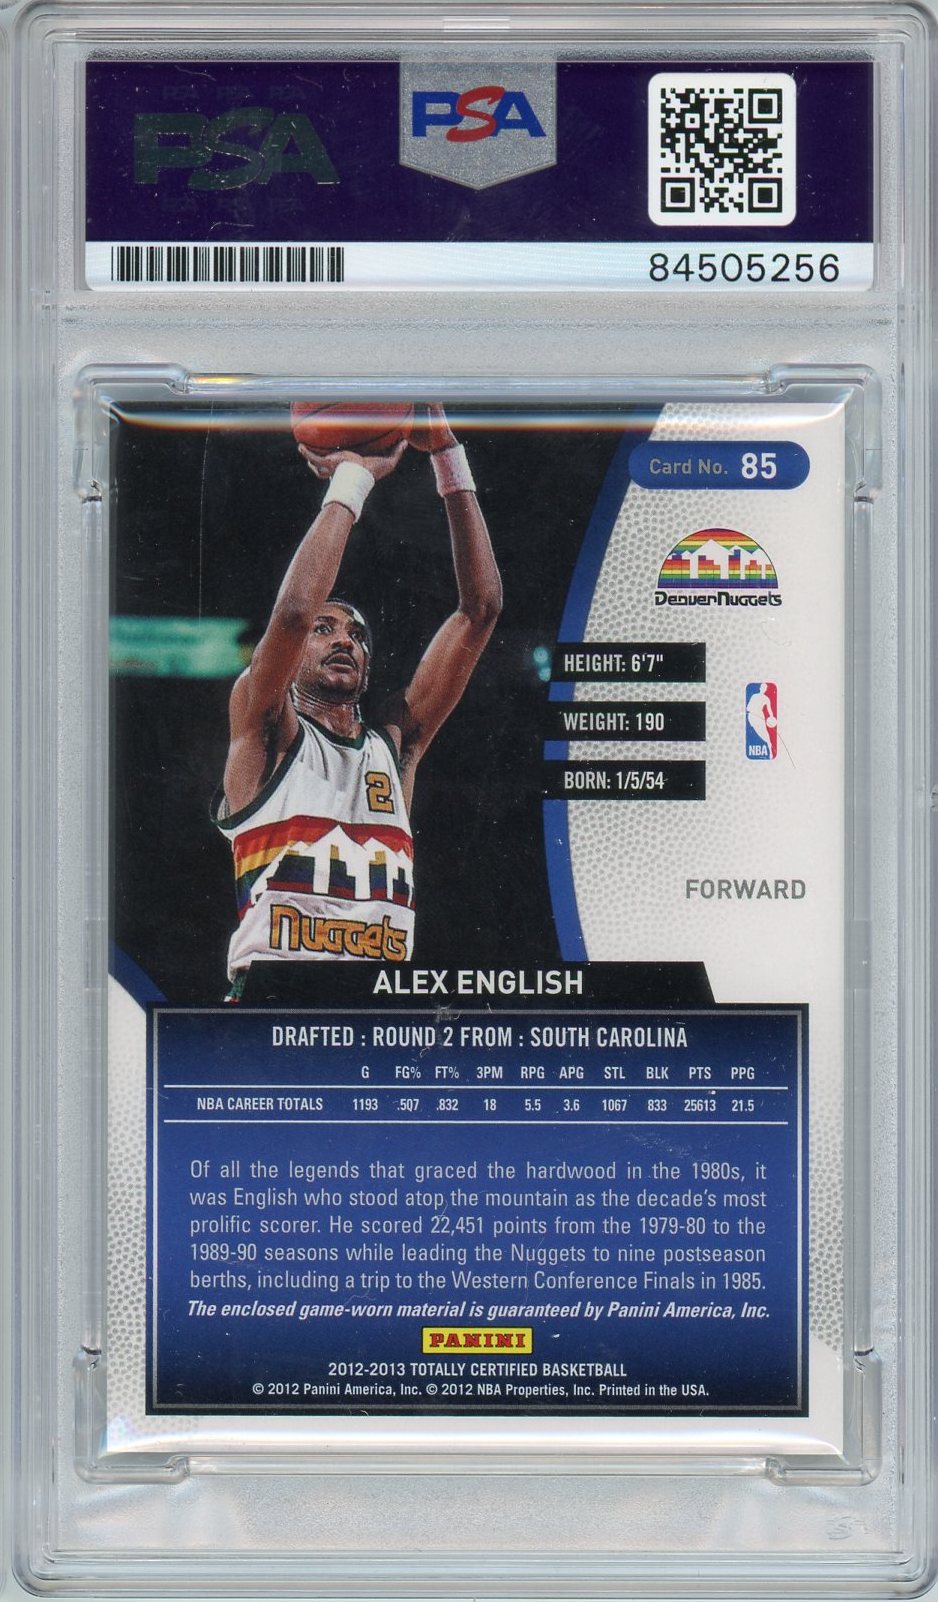 2013 PANINI TOTALLY CERTIFIED ALEX ENGLISH BLUE JERSEY #75/99 #85 PSA/DNA AUTO